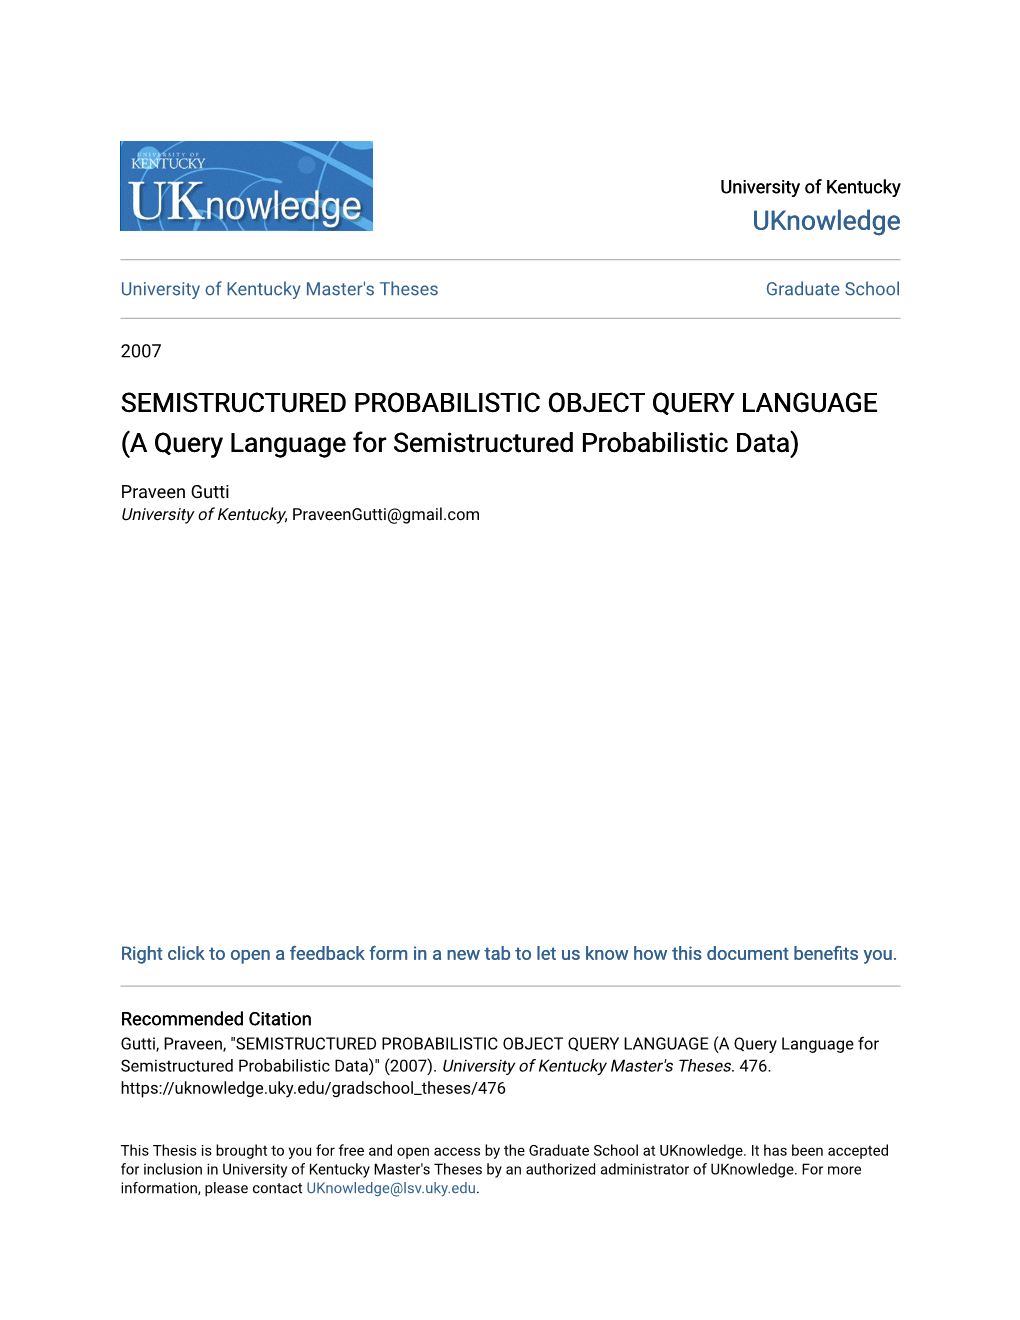 SEMISTRUCTURED PROBABILISTIC OBJECT QUERY LANGUAGE (A Query Language for Semistructured Probabilistic Data)